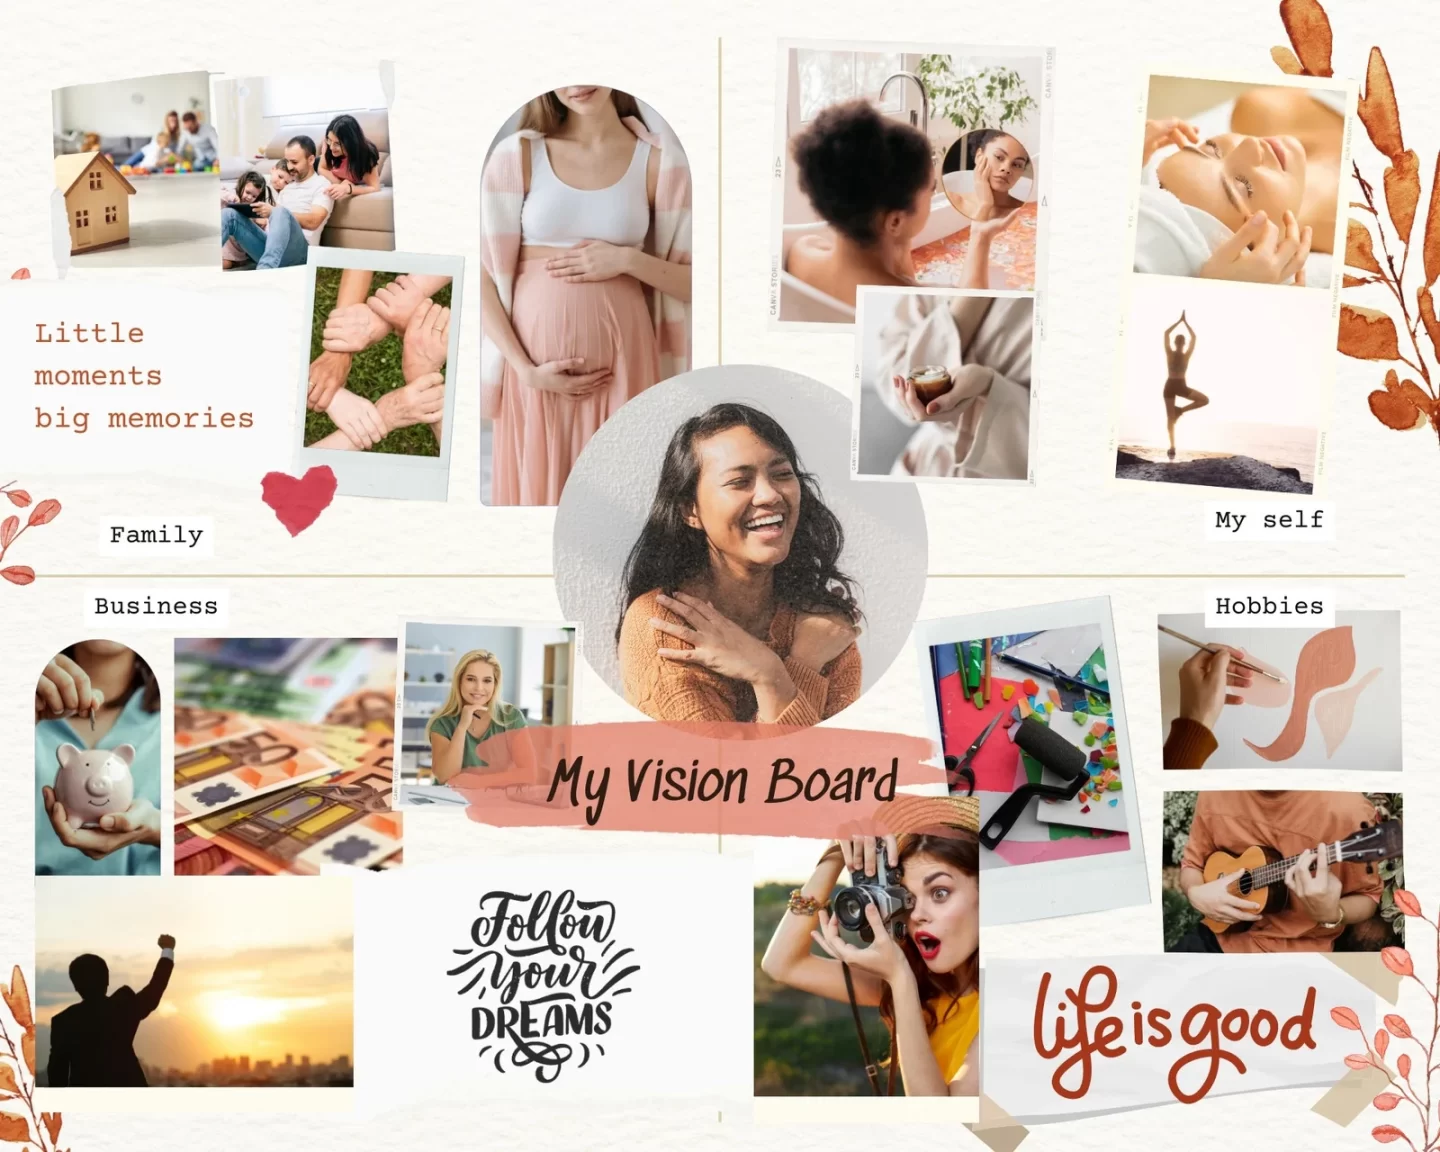 Canva vision board example and template. Vision board examples. Vision board example. Examples of vision boards. Examples of a vision board. Example of a vision board. Ideas for vision board. Vision board ideas. Vision boards ideas